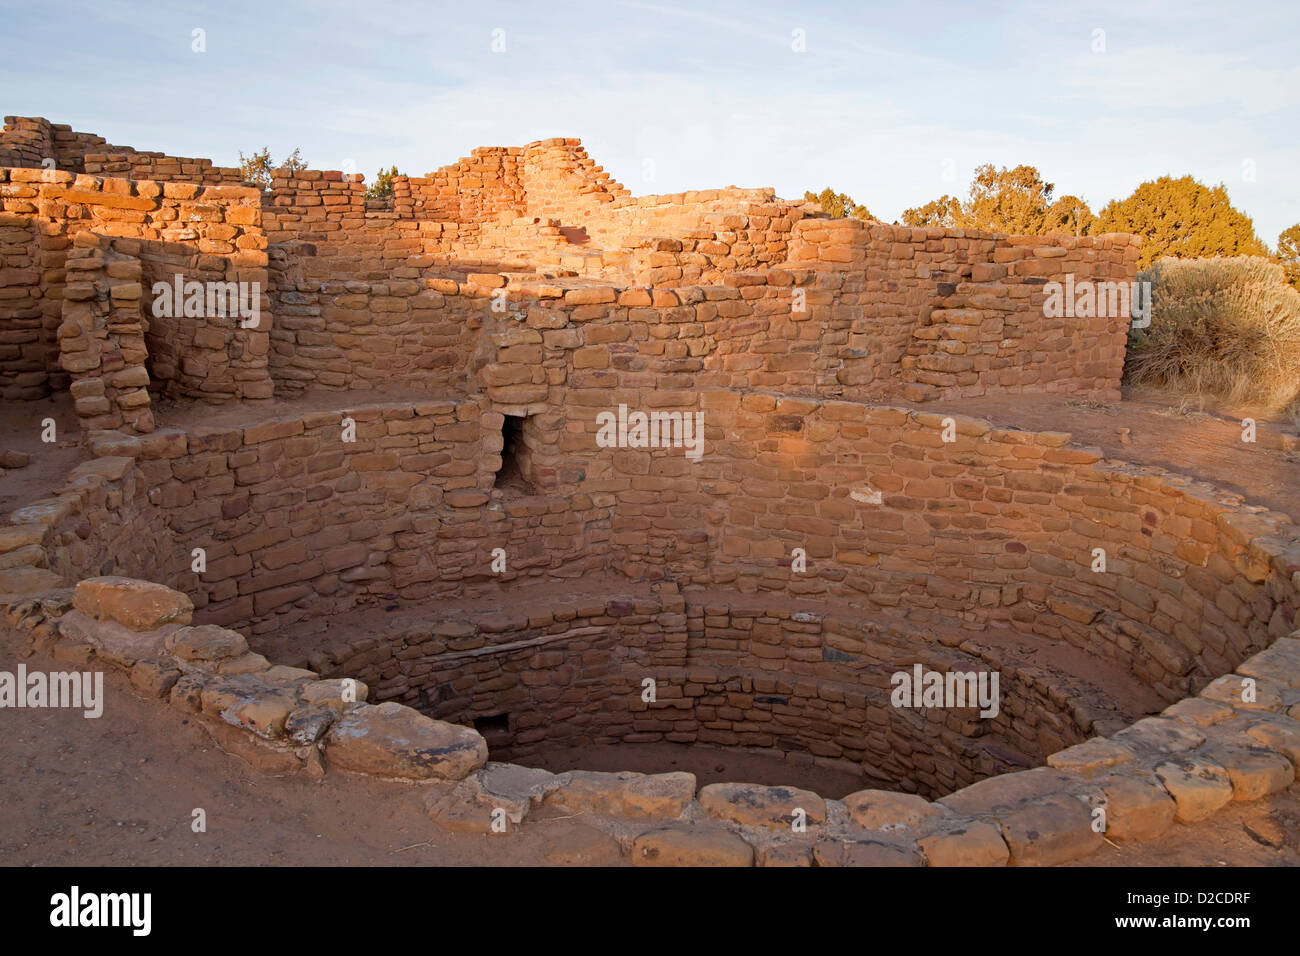 ruins of cliff dwelling of pre-Columbian Anasazi indians and UNESCO World Heritage site, Mesa Verde National Park in Colorado, Stock Photo